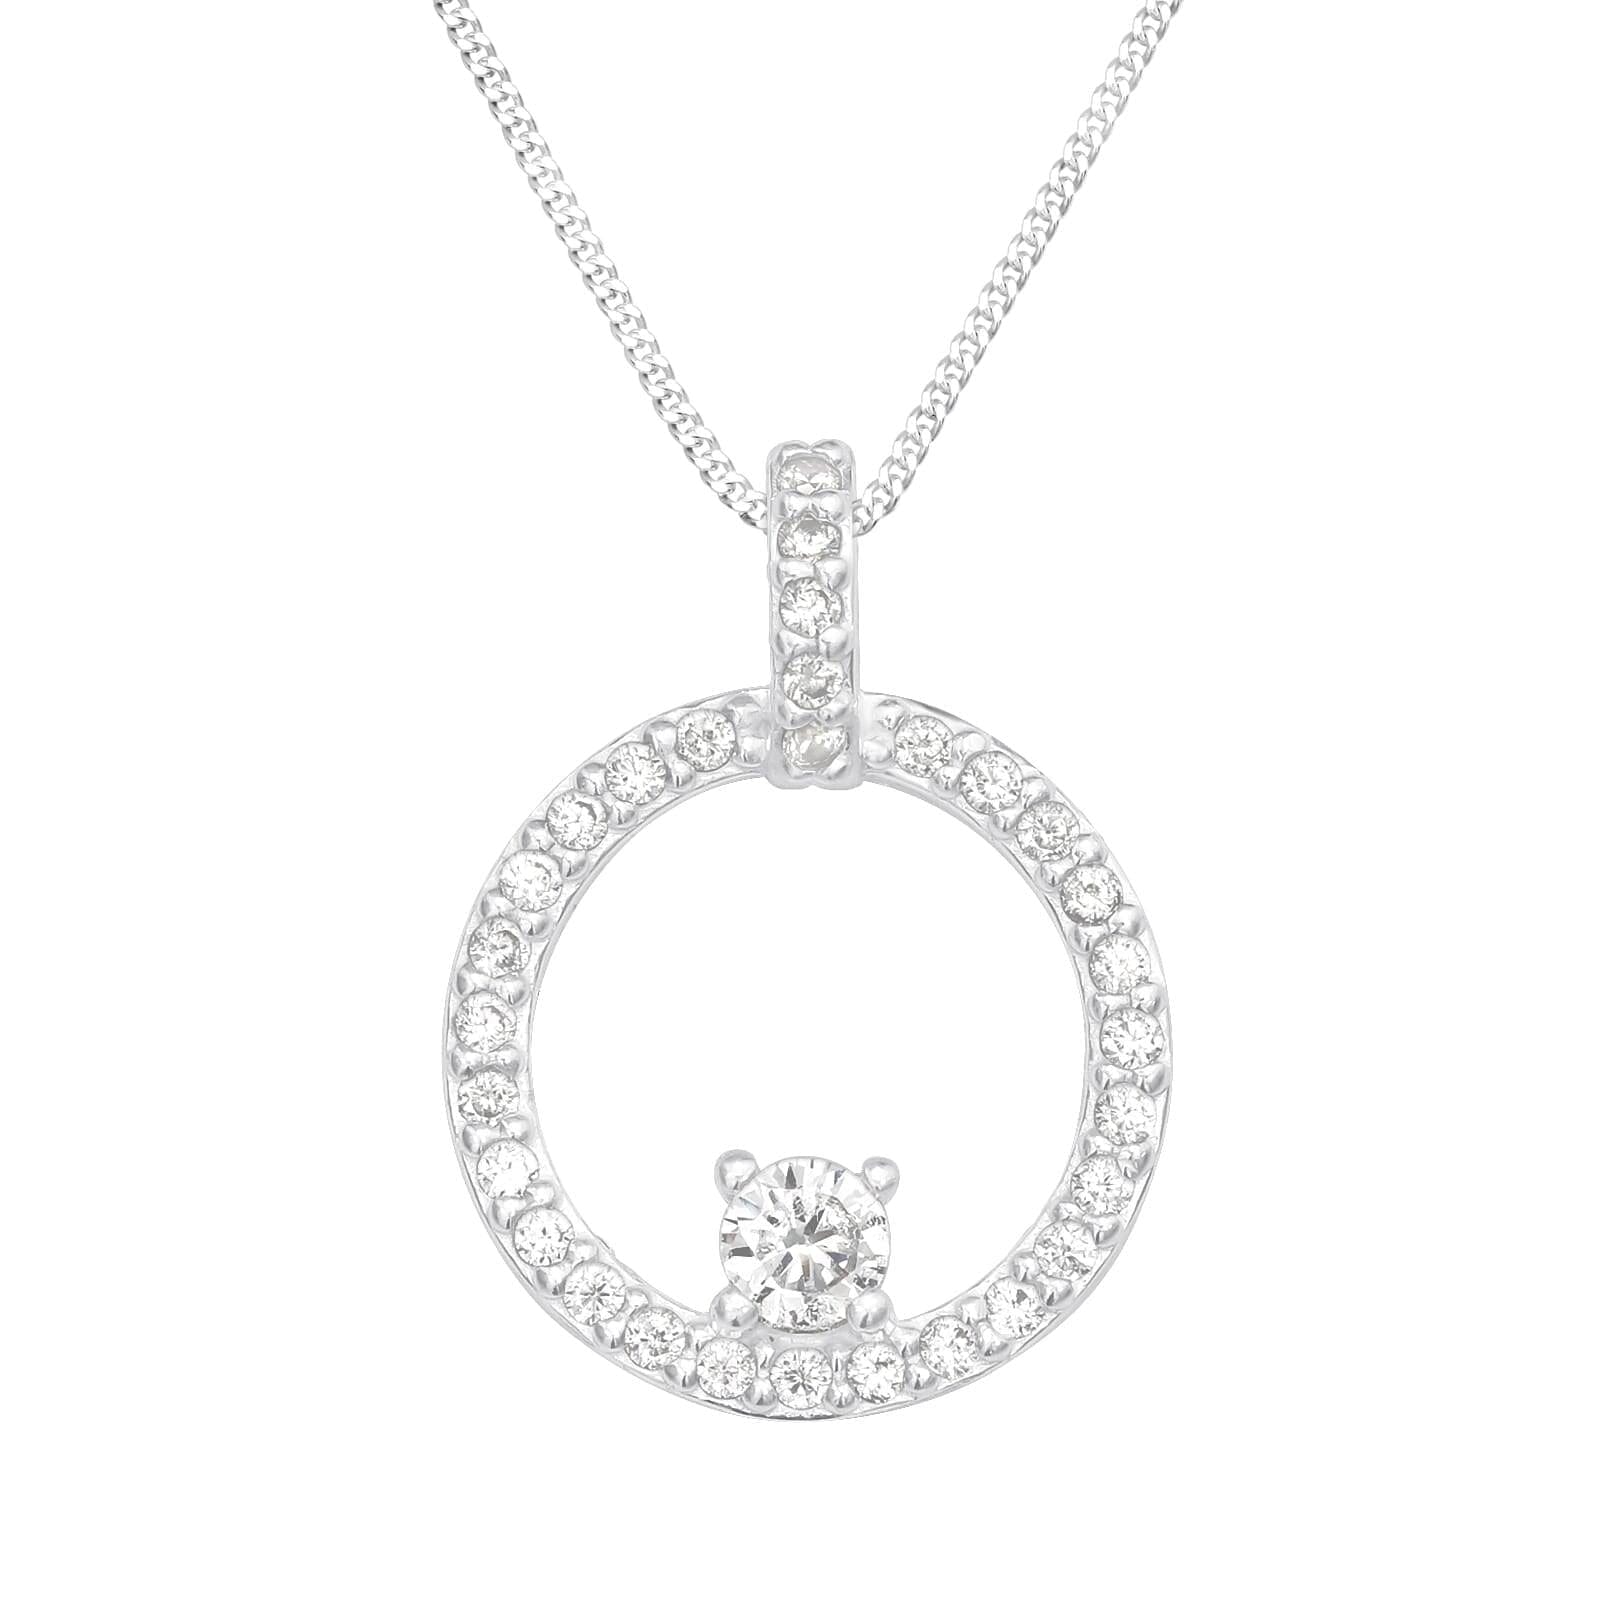 Asfour 925 Sterling Silver Necklace with Round Zicron Stone, Clear